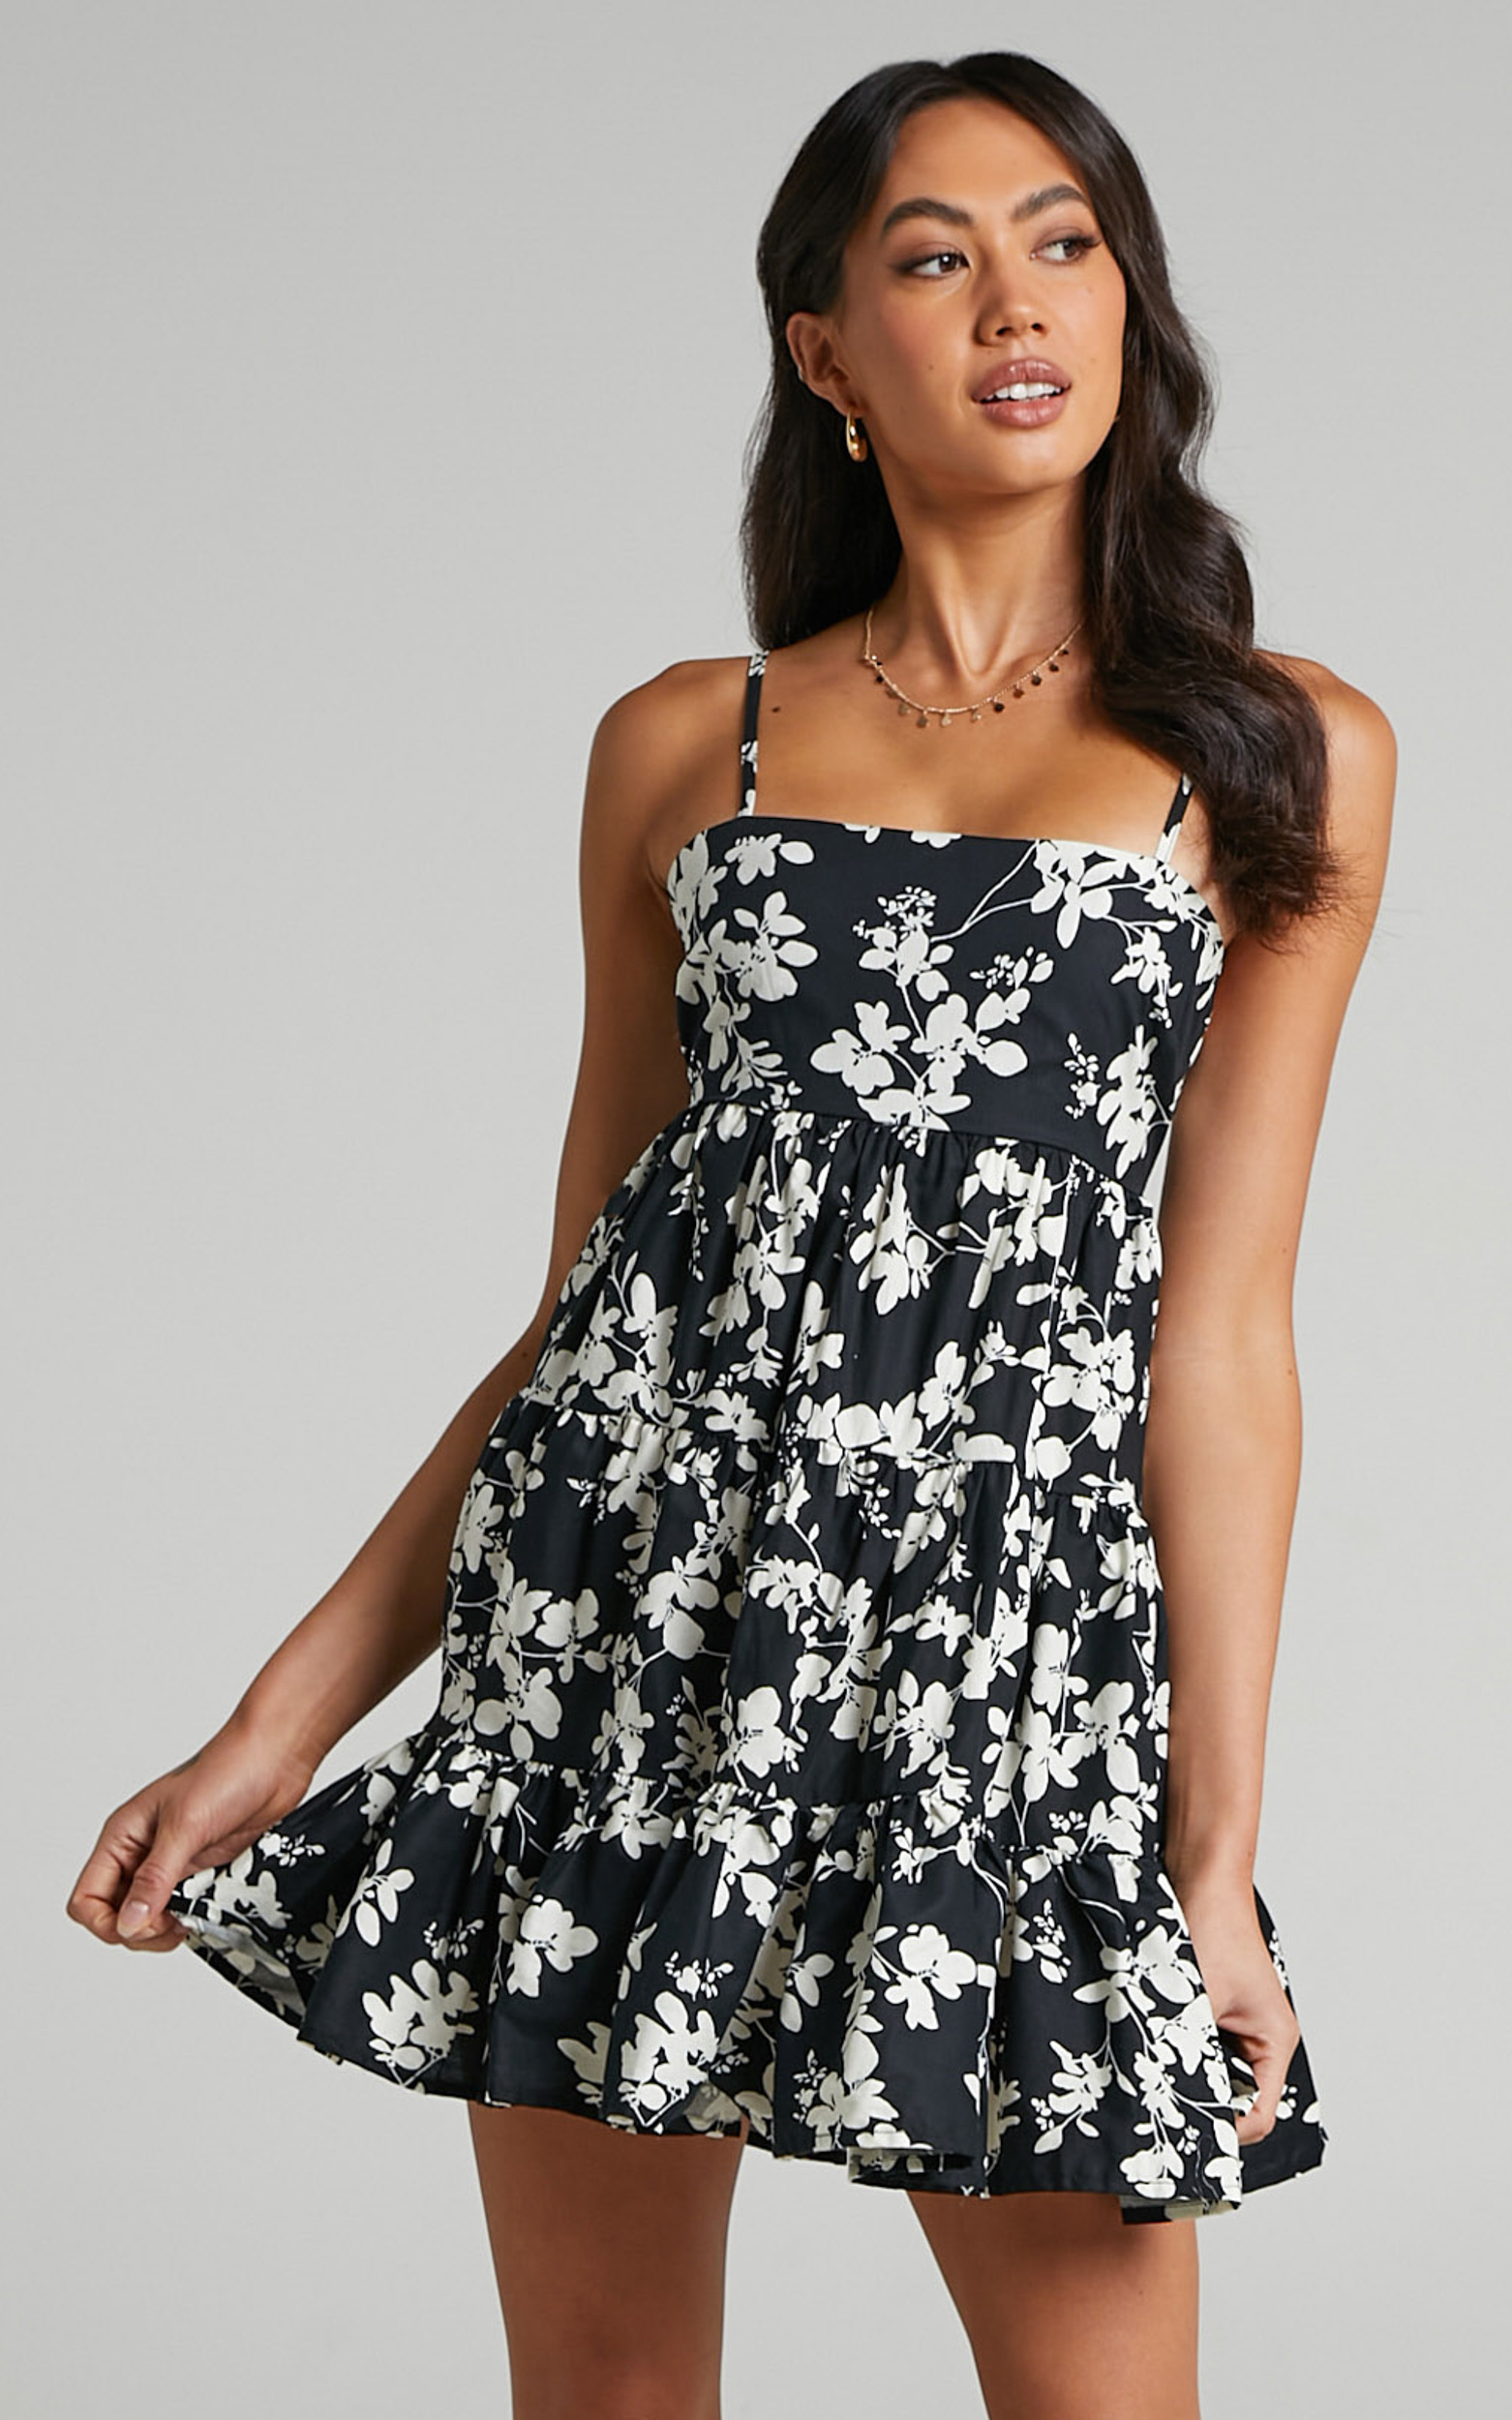 Lorelle Straight Neck Tiered Mini Dress in Black Floral - 04, BLK2, hi-res image number null